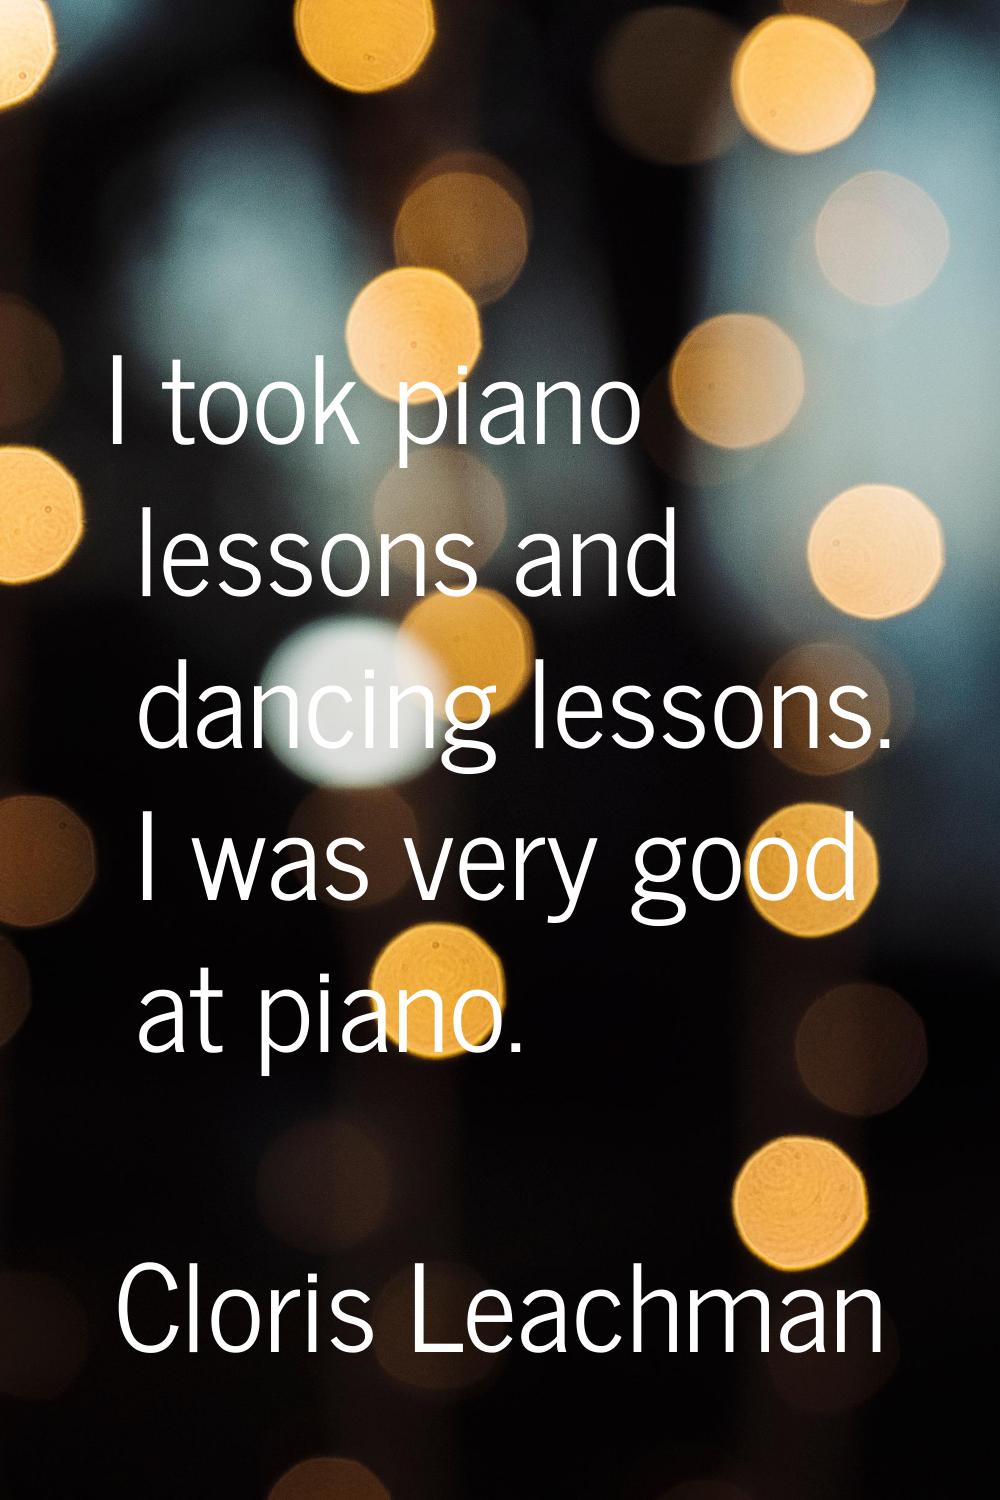 I took piano lessons and dancing lessons. I was very good at piano.